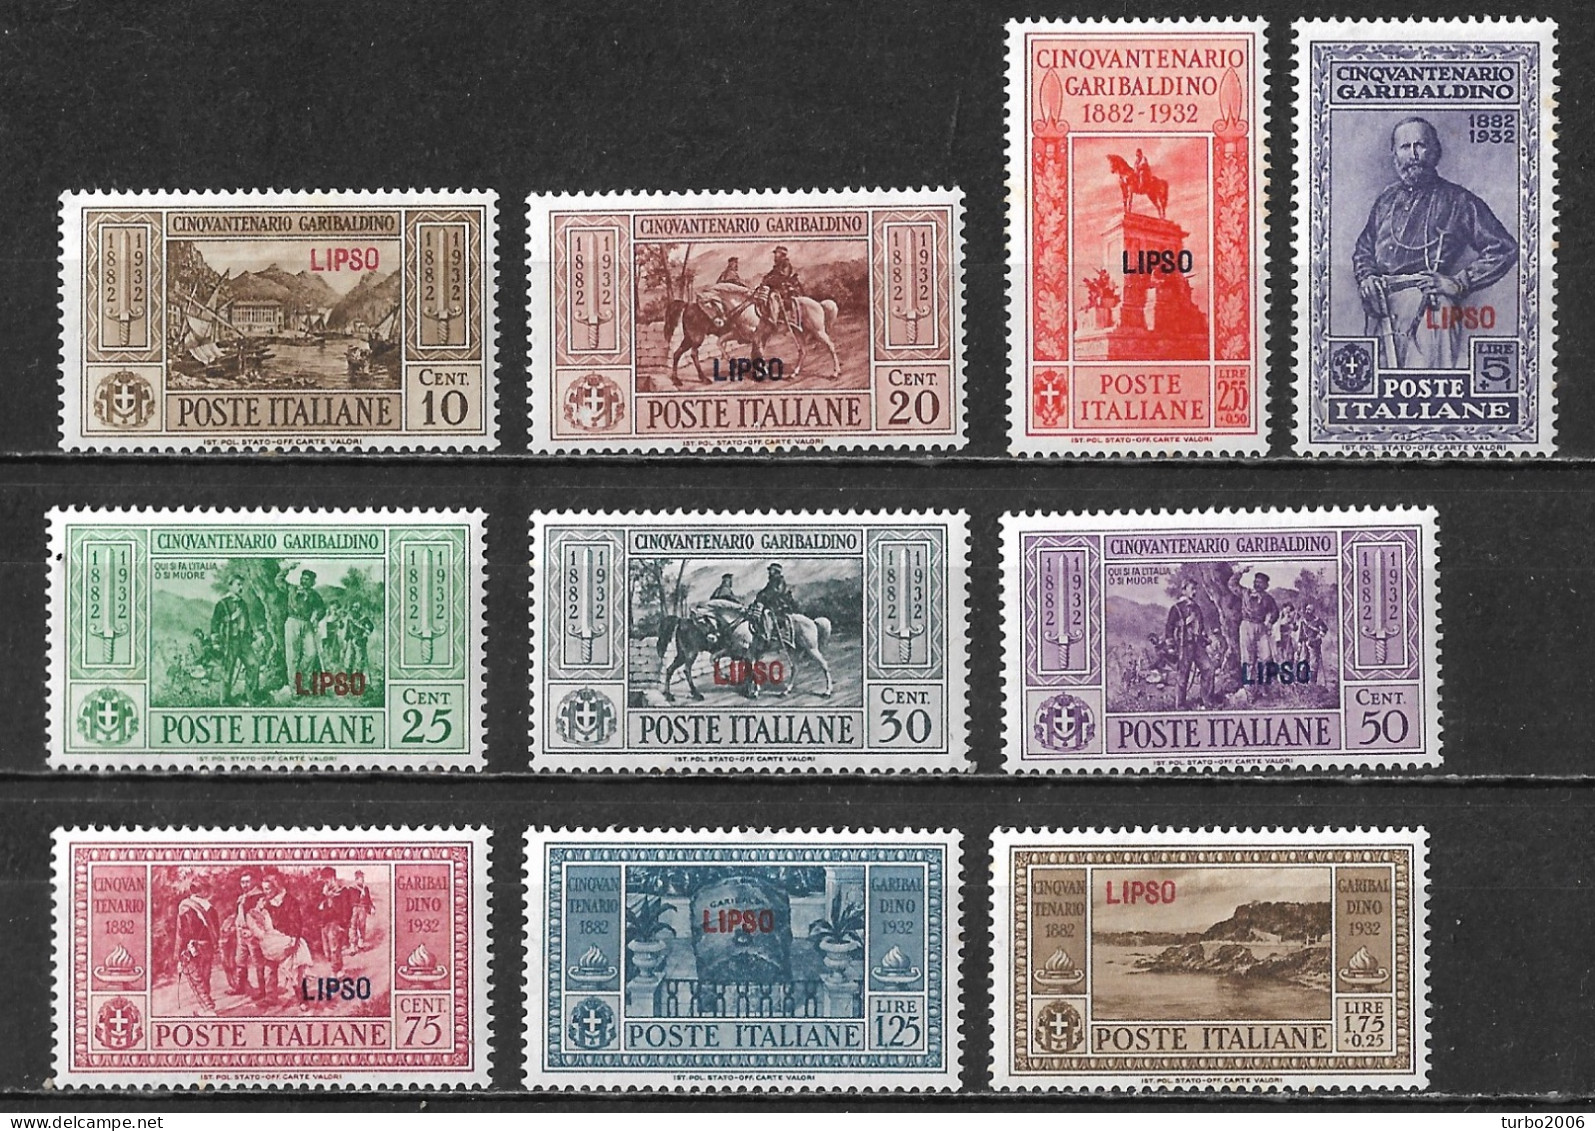 DODECANESE 1932 Stamps Of Italy Garibaldi Set With Overprint LIPSO Complete MH Set Vl. 17 / 26 - Dodecanese